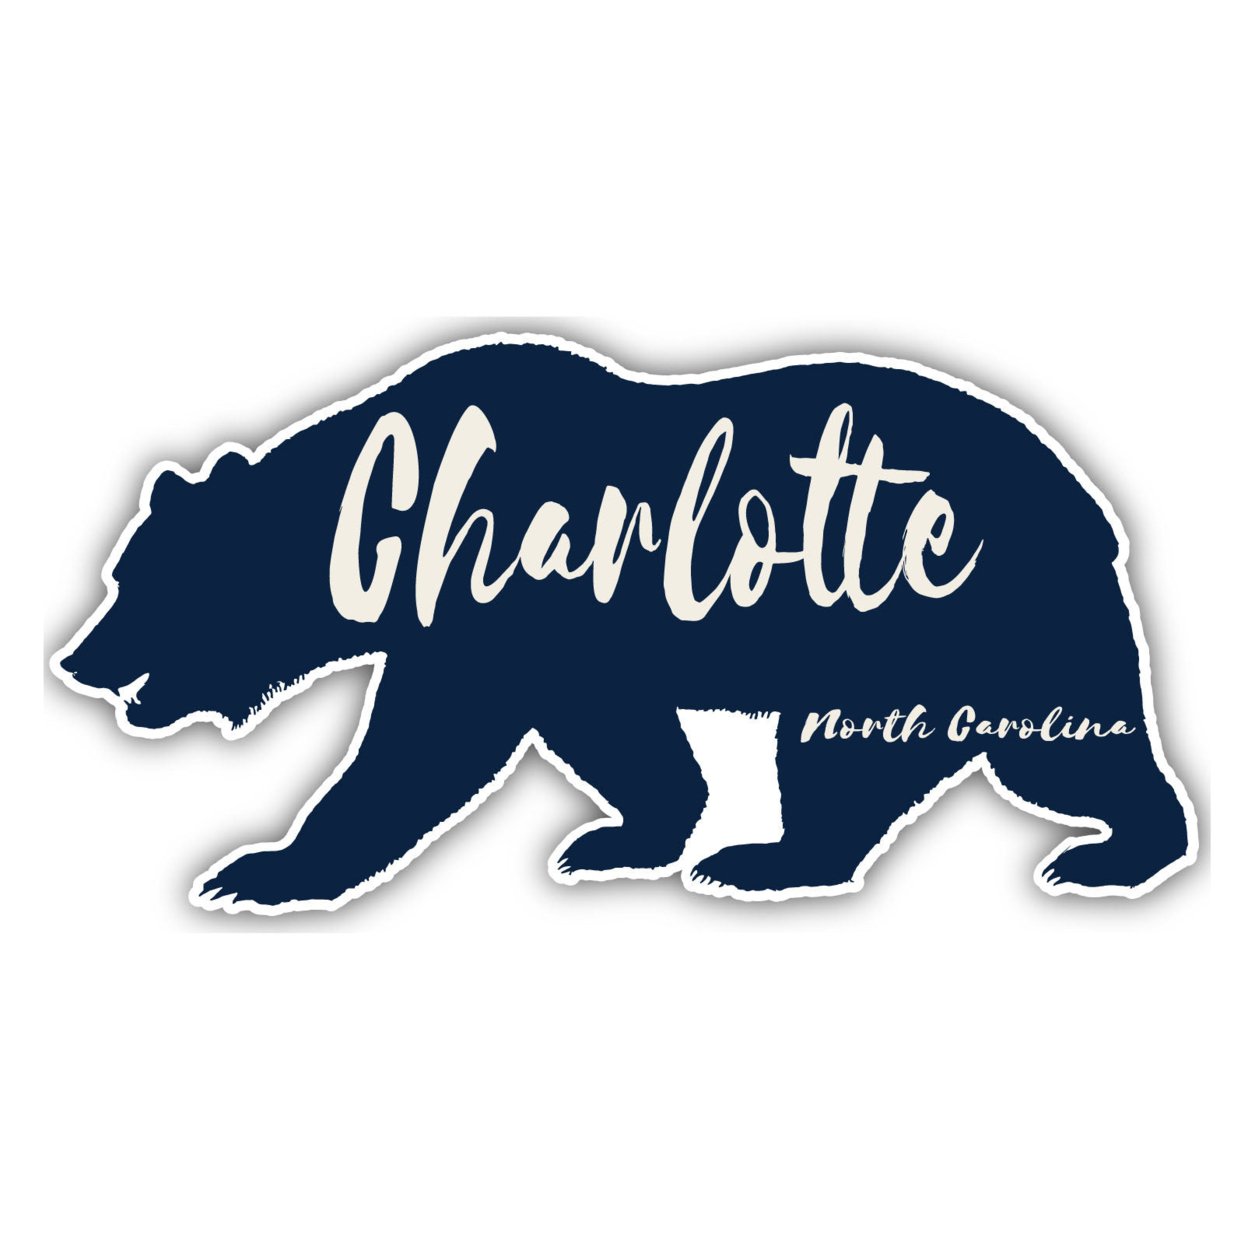 Charlotte North Carolina Souvenir Decorative Stickers (Choose Theme And Size) - Single Unit, 8-Inch, Great Outdoors